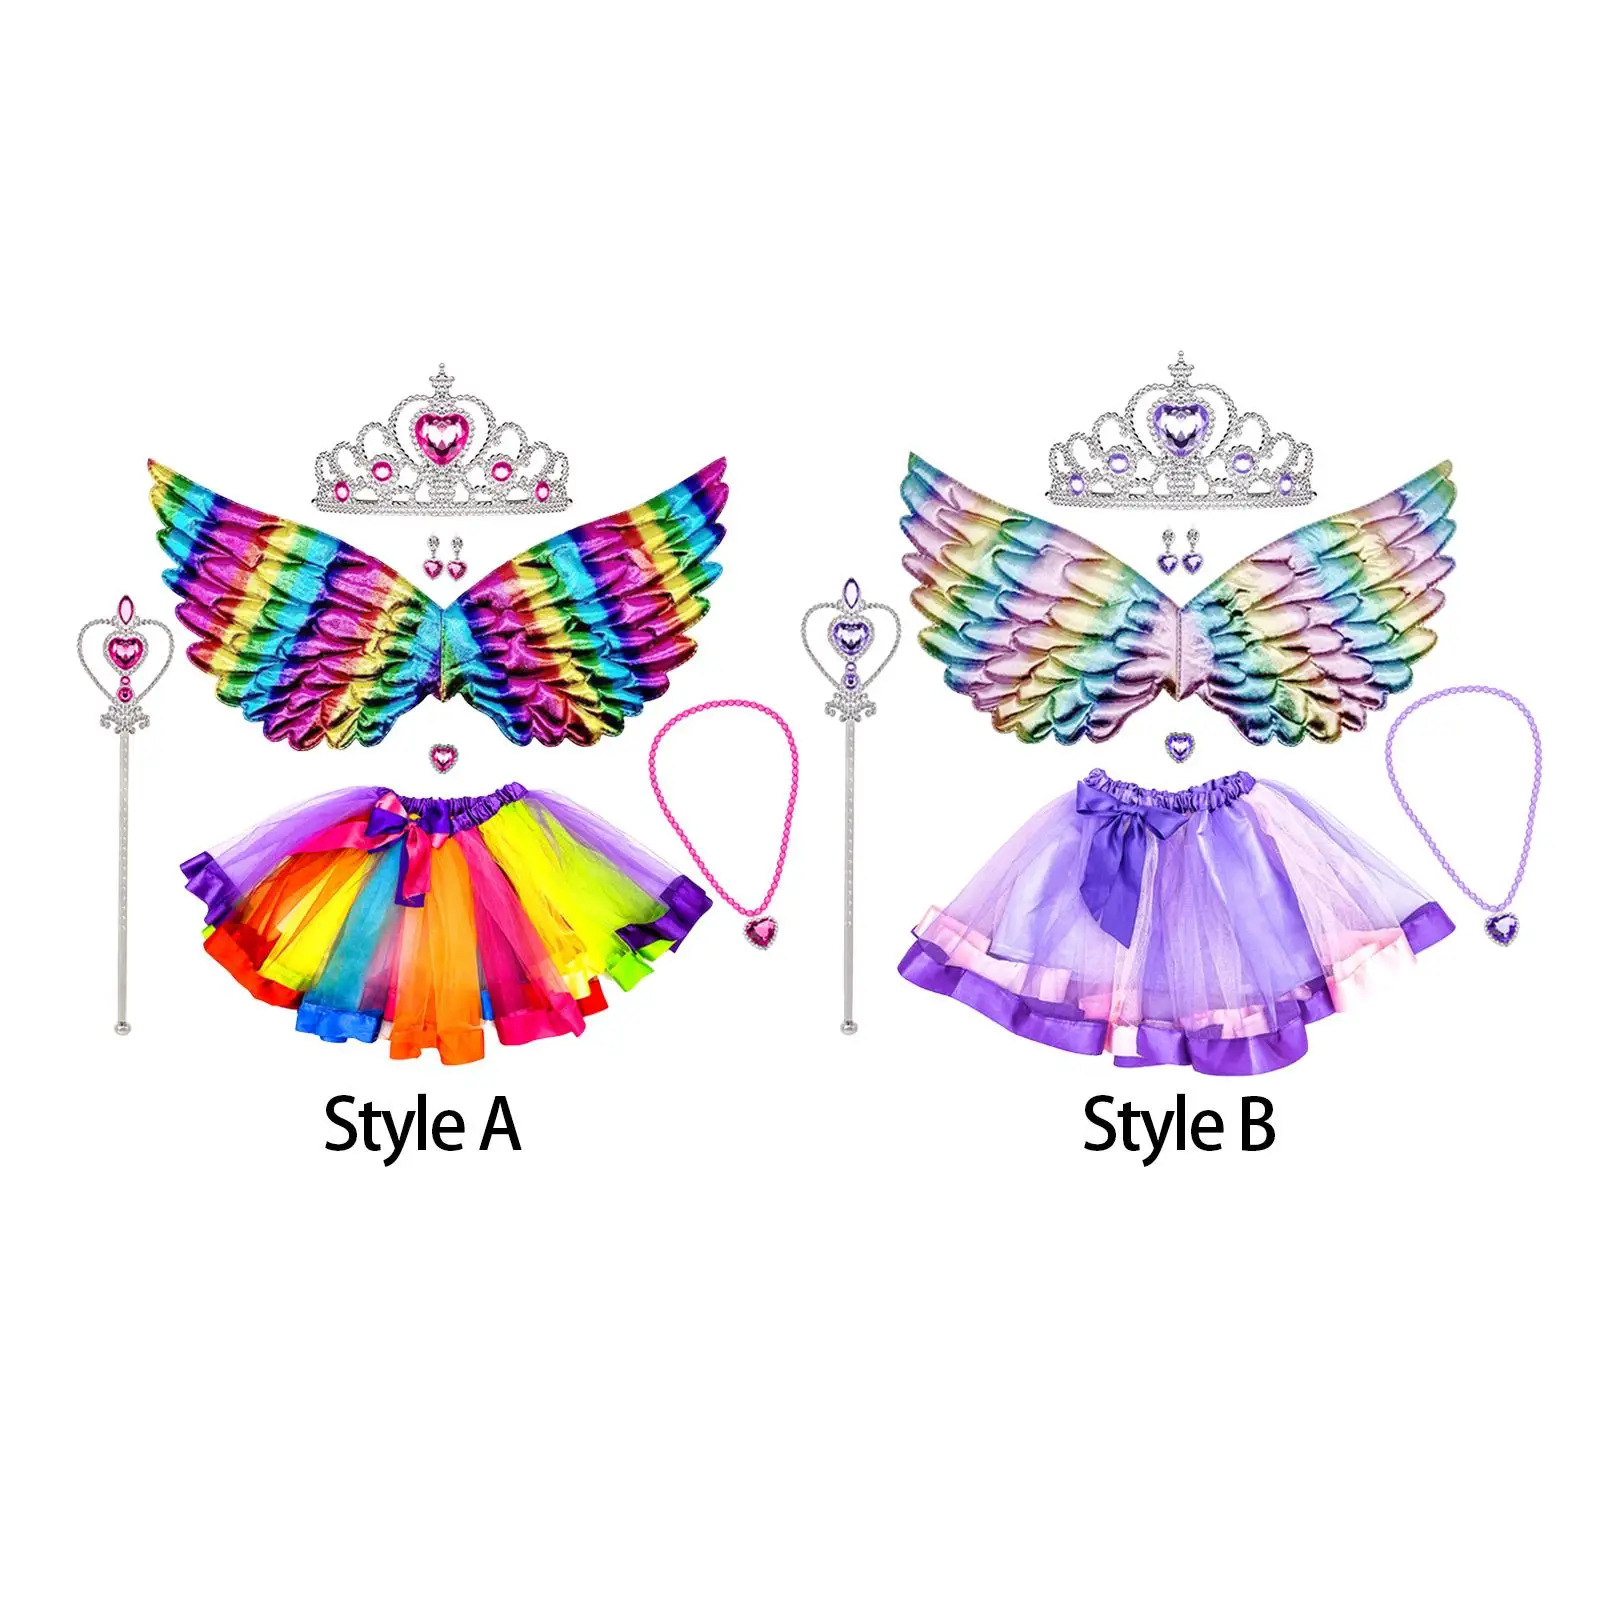 

Girls Fairy Costume Cosplay Clothes Photo Prop Fancy Dress Kids Butterfly Wing for Halloween Festival Masquerade Nightclub